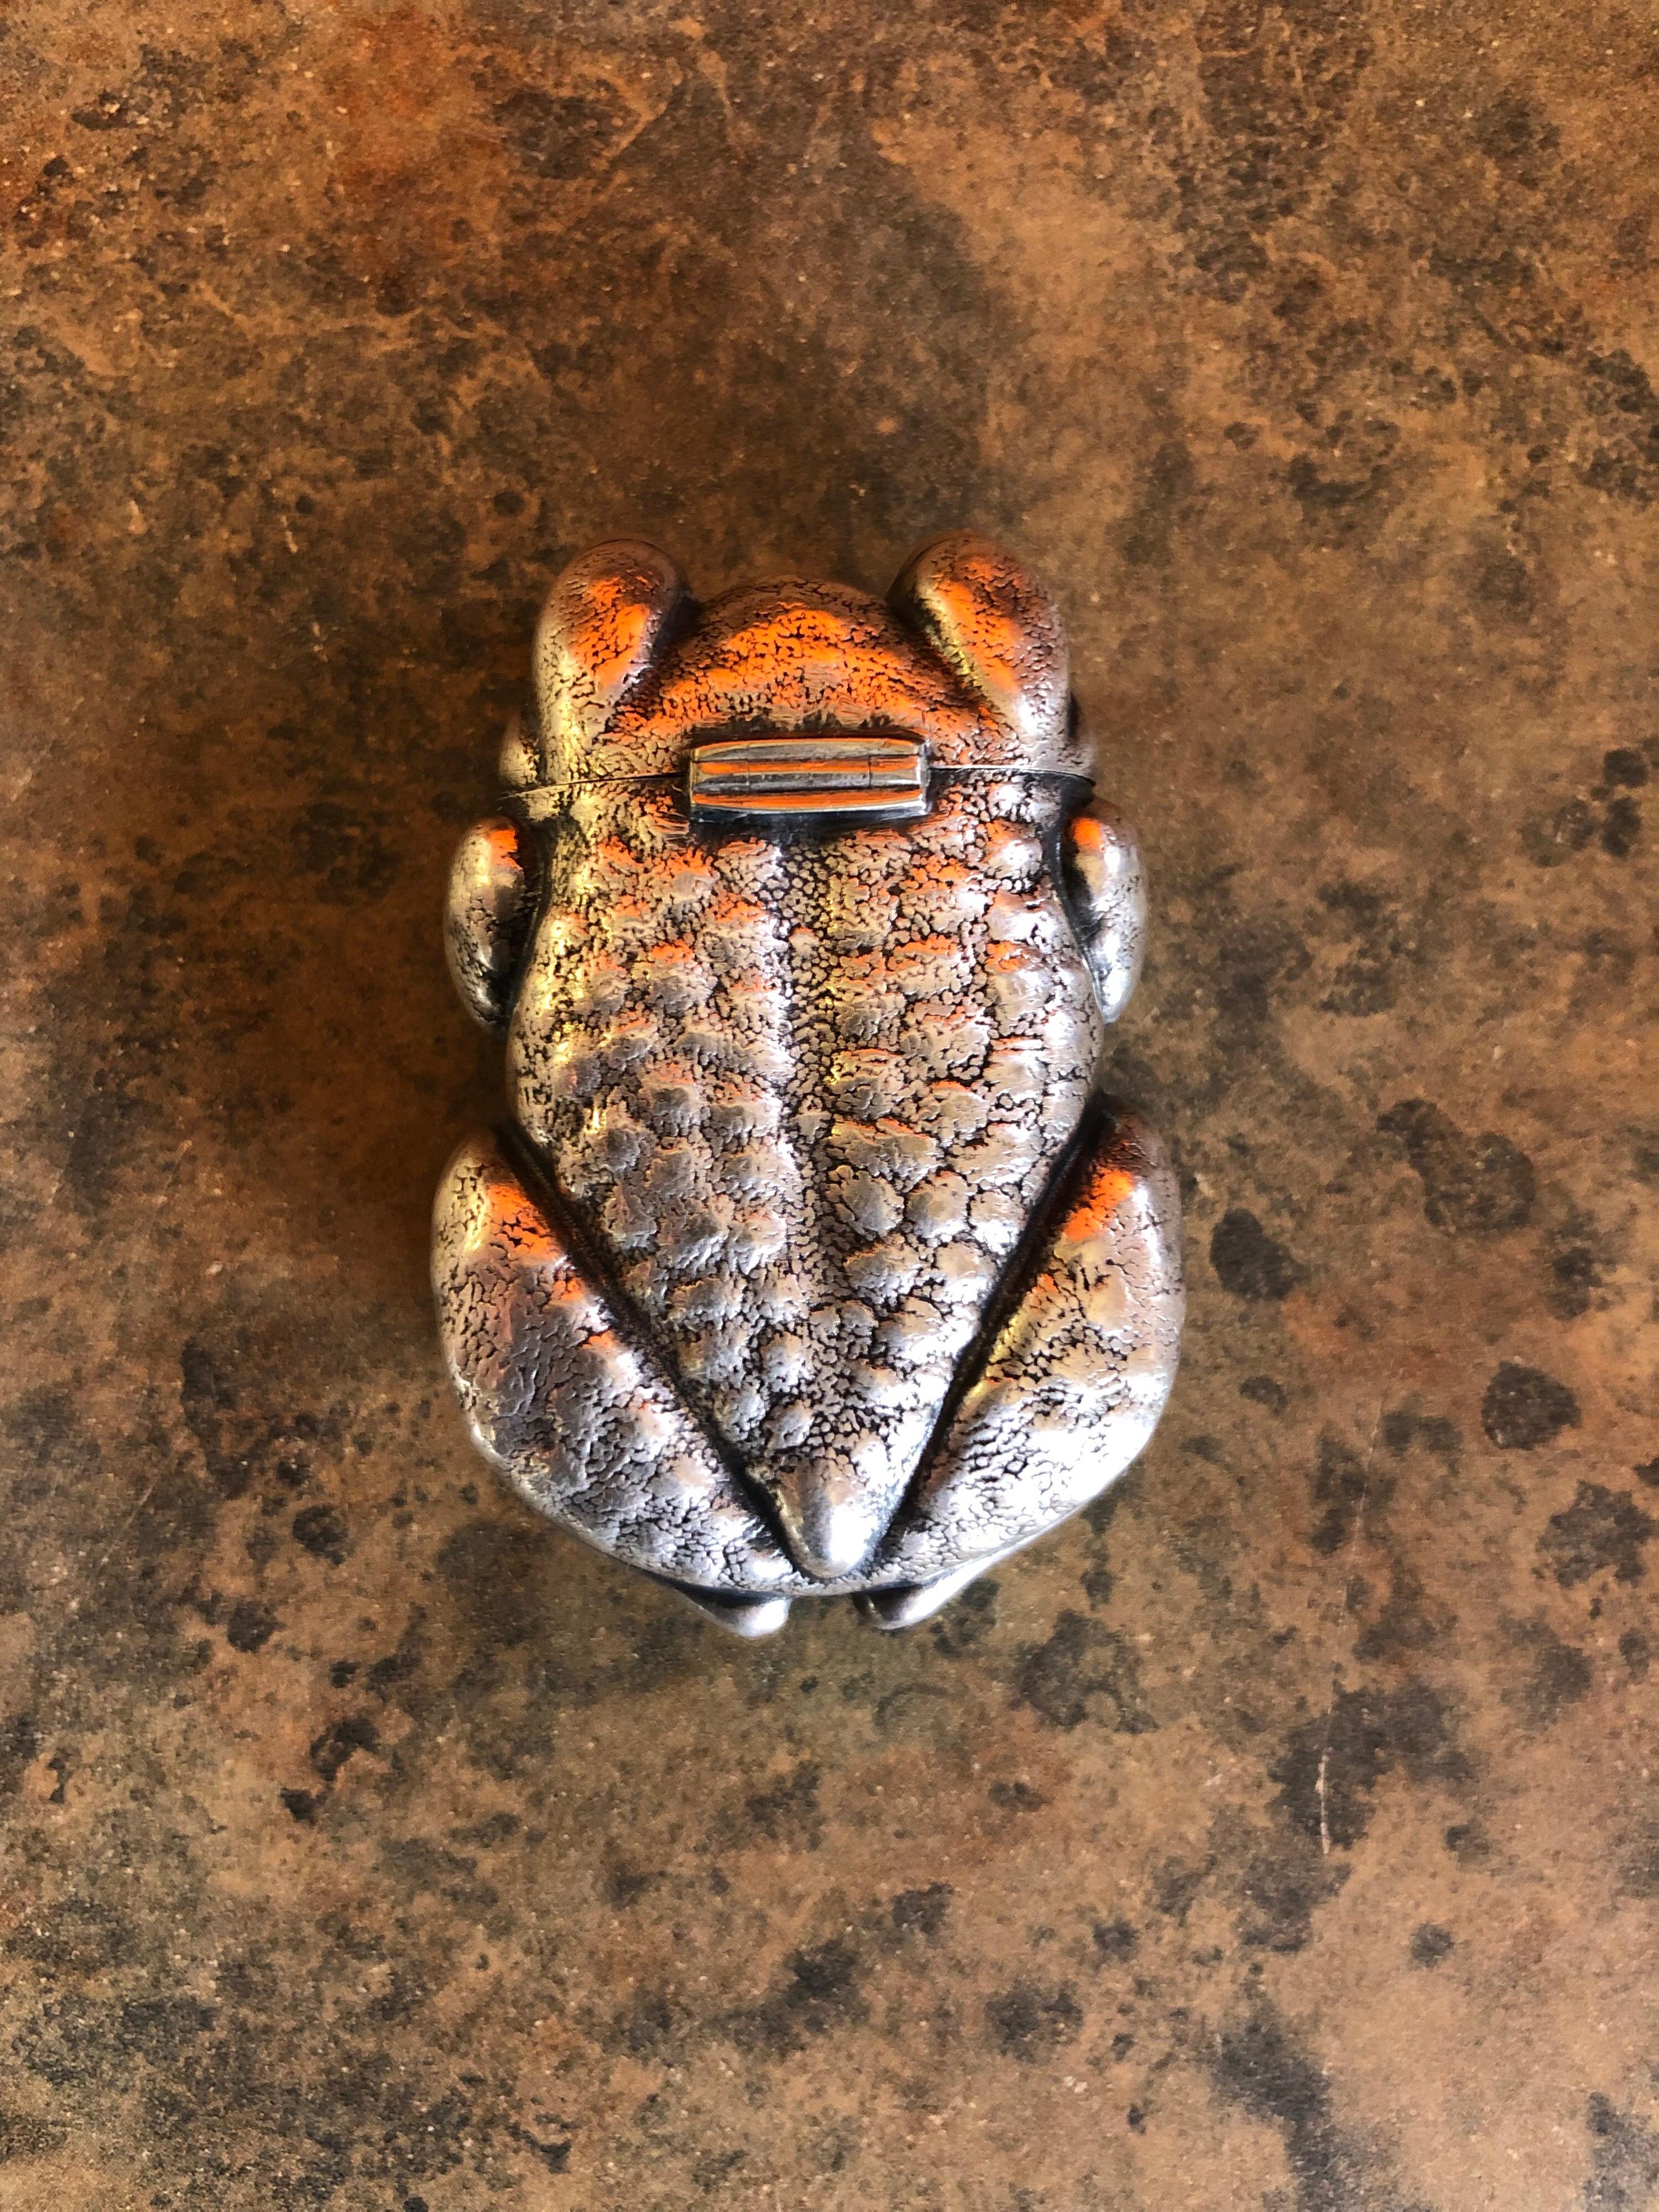 Repoussé Silver Plated Repousse Frog Form Match Safe by Gorham